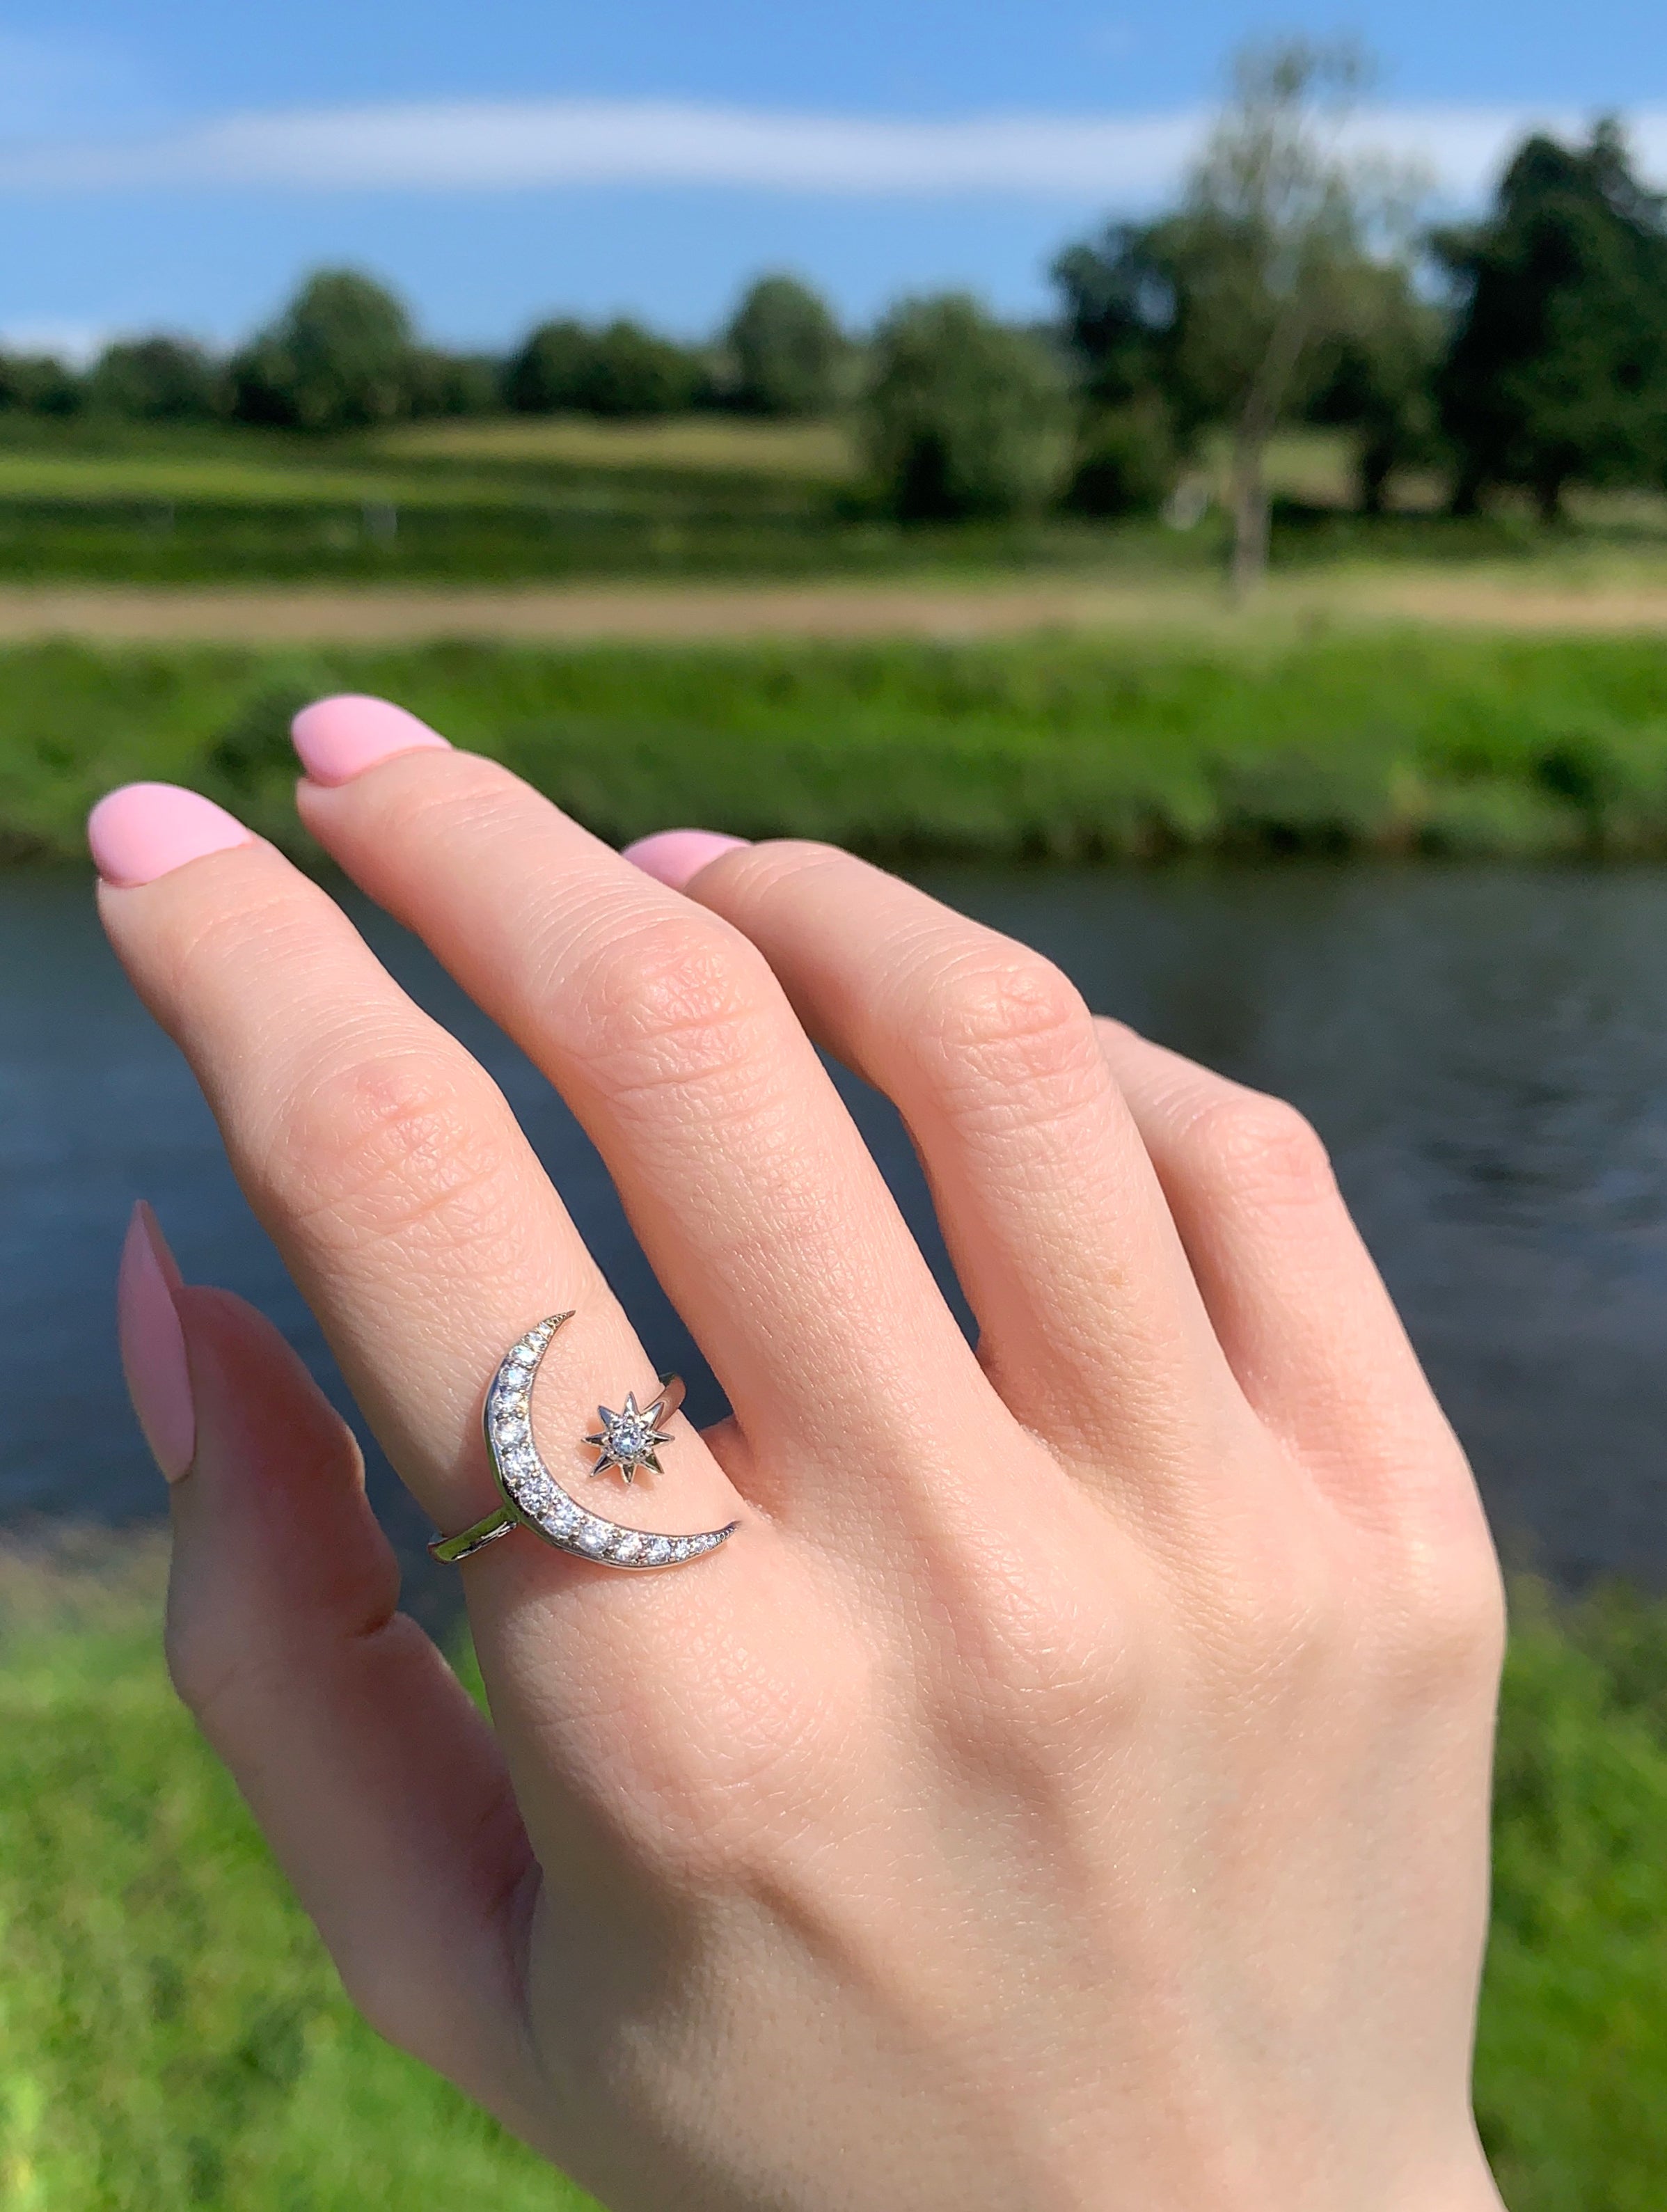 Silver Moon and Star Ring - Adjustable